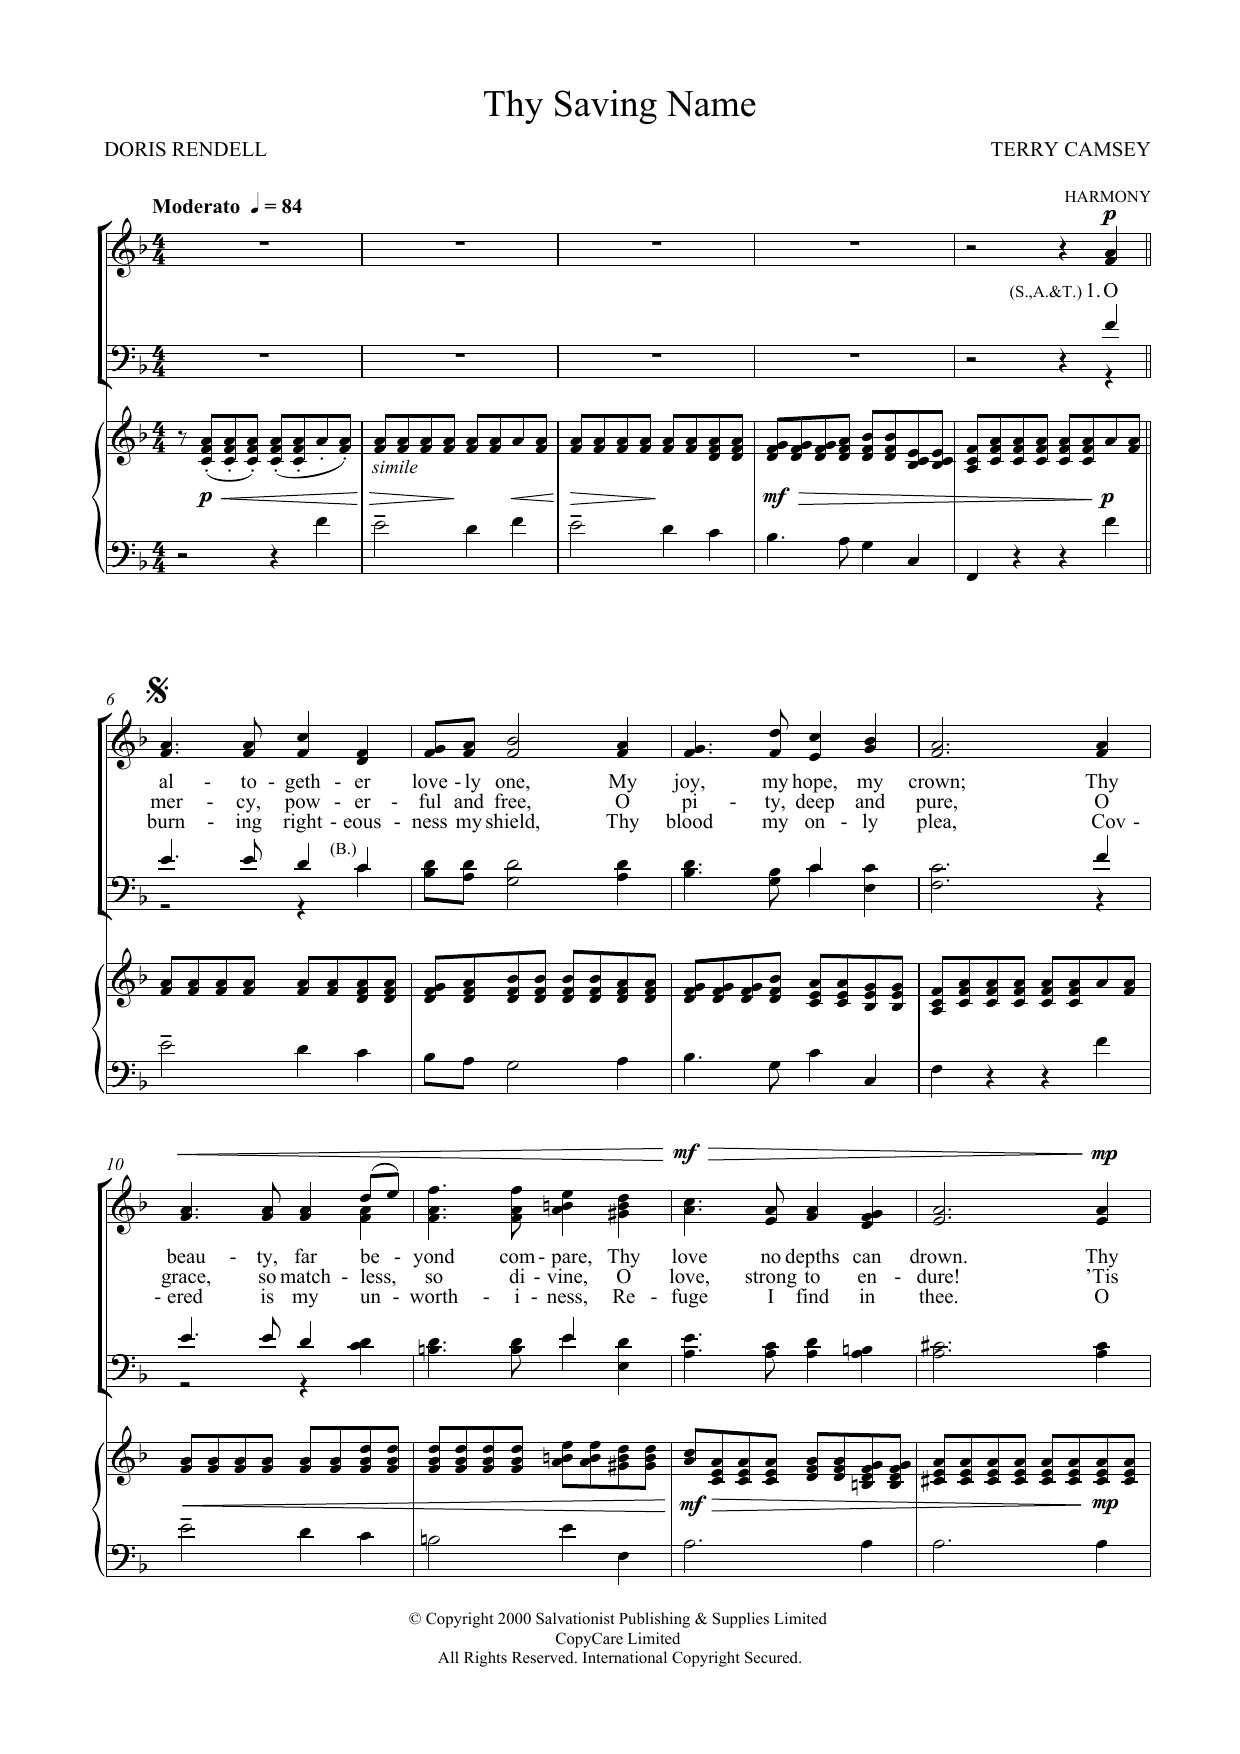 Download The Salvation Army Thy Saving Name Sheet Music